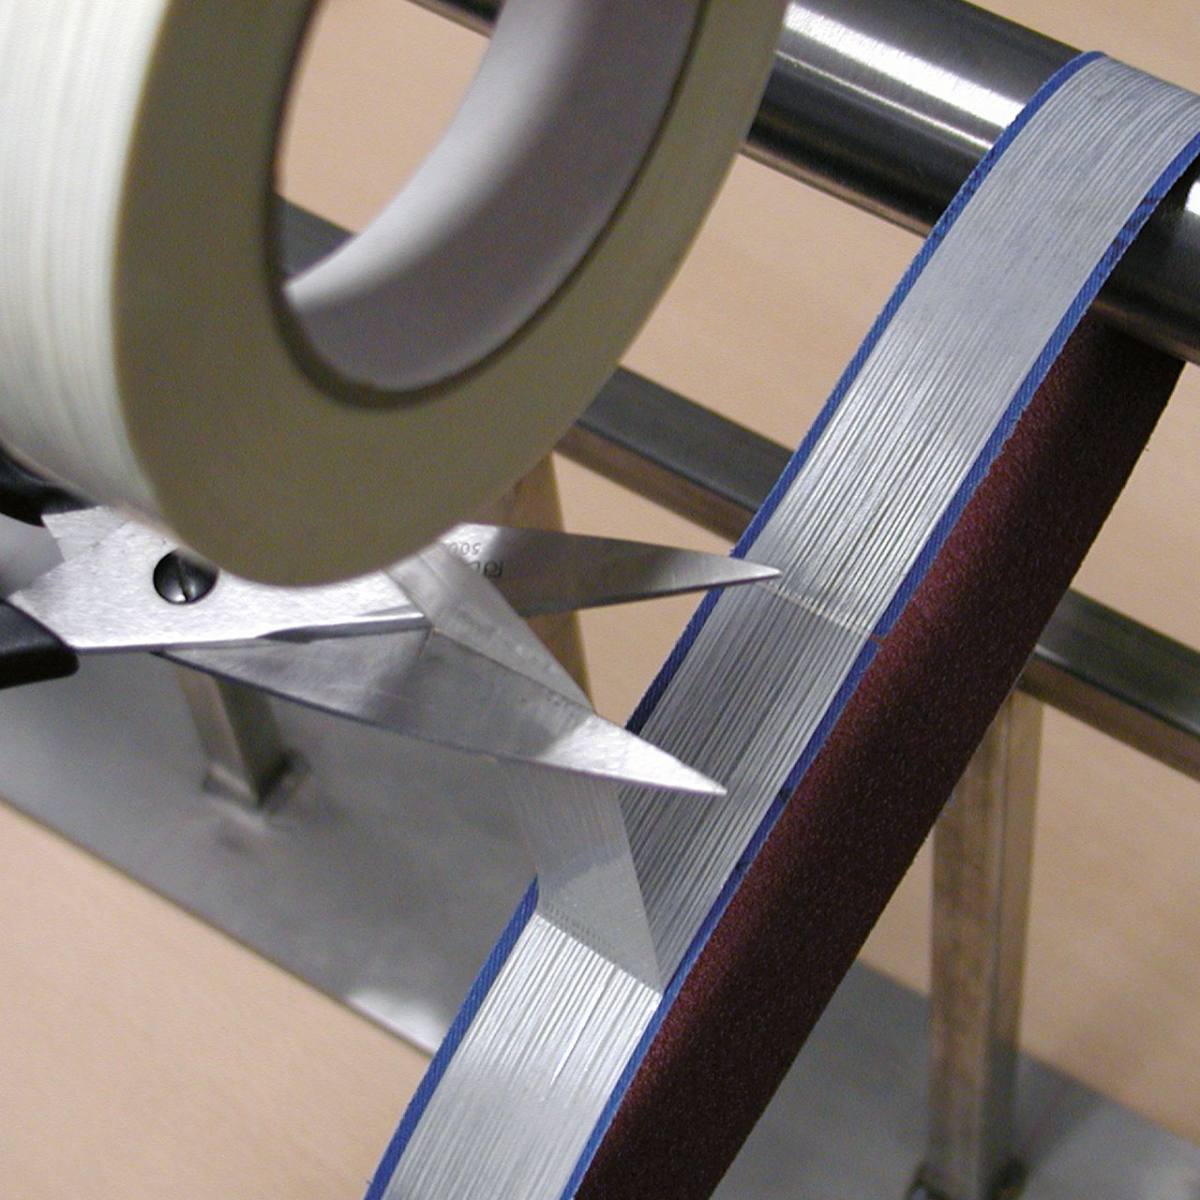 POLY-PTX Special adhesive tape, 25 mm wide, 50 m long